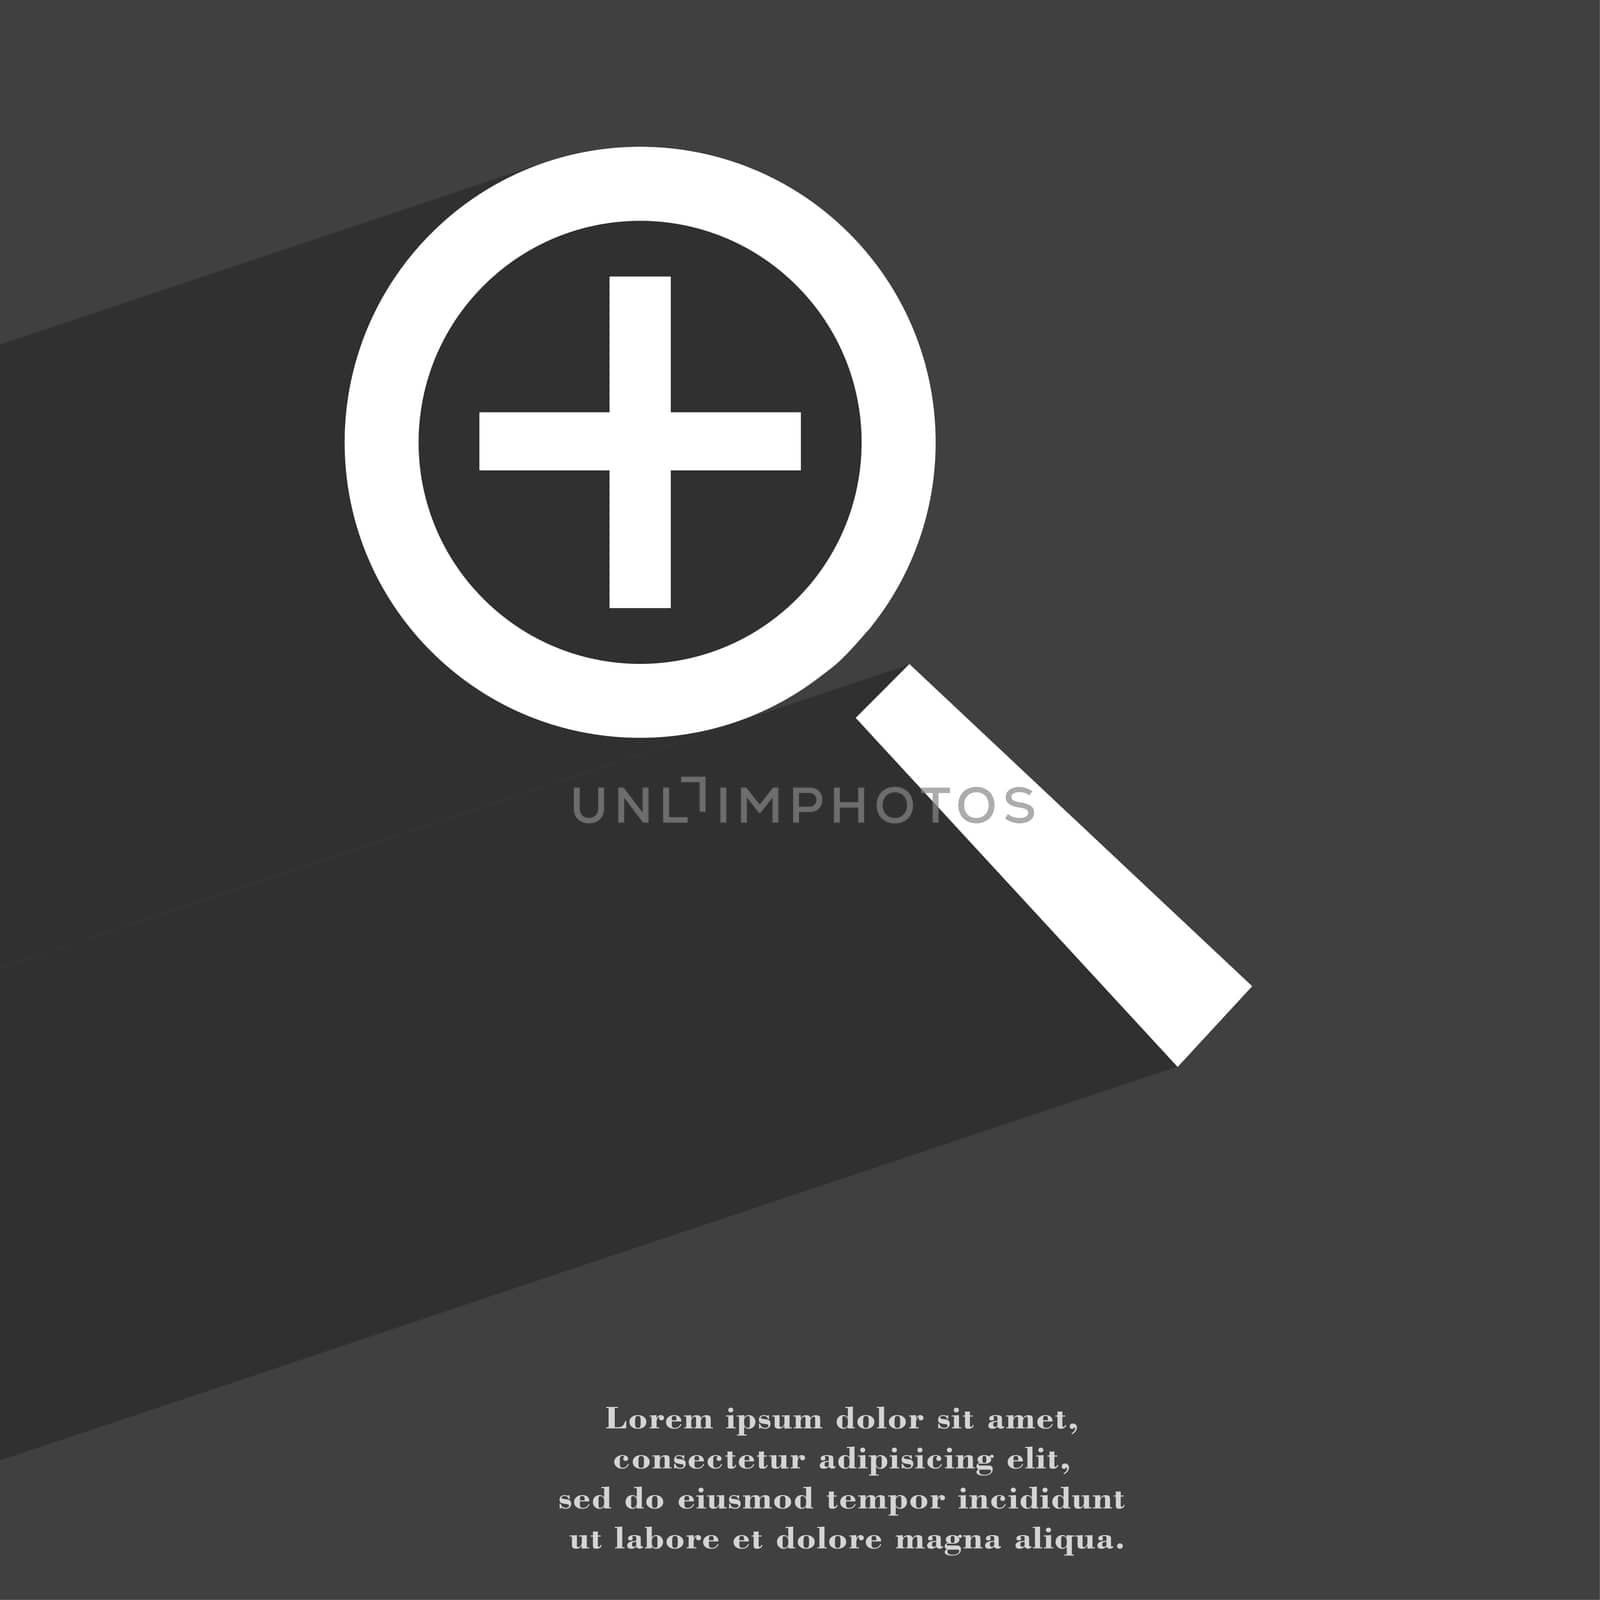 Magnifier glass, Zoom tool icon symbol Flat modern web design with long shadow and space for your text. illustration